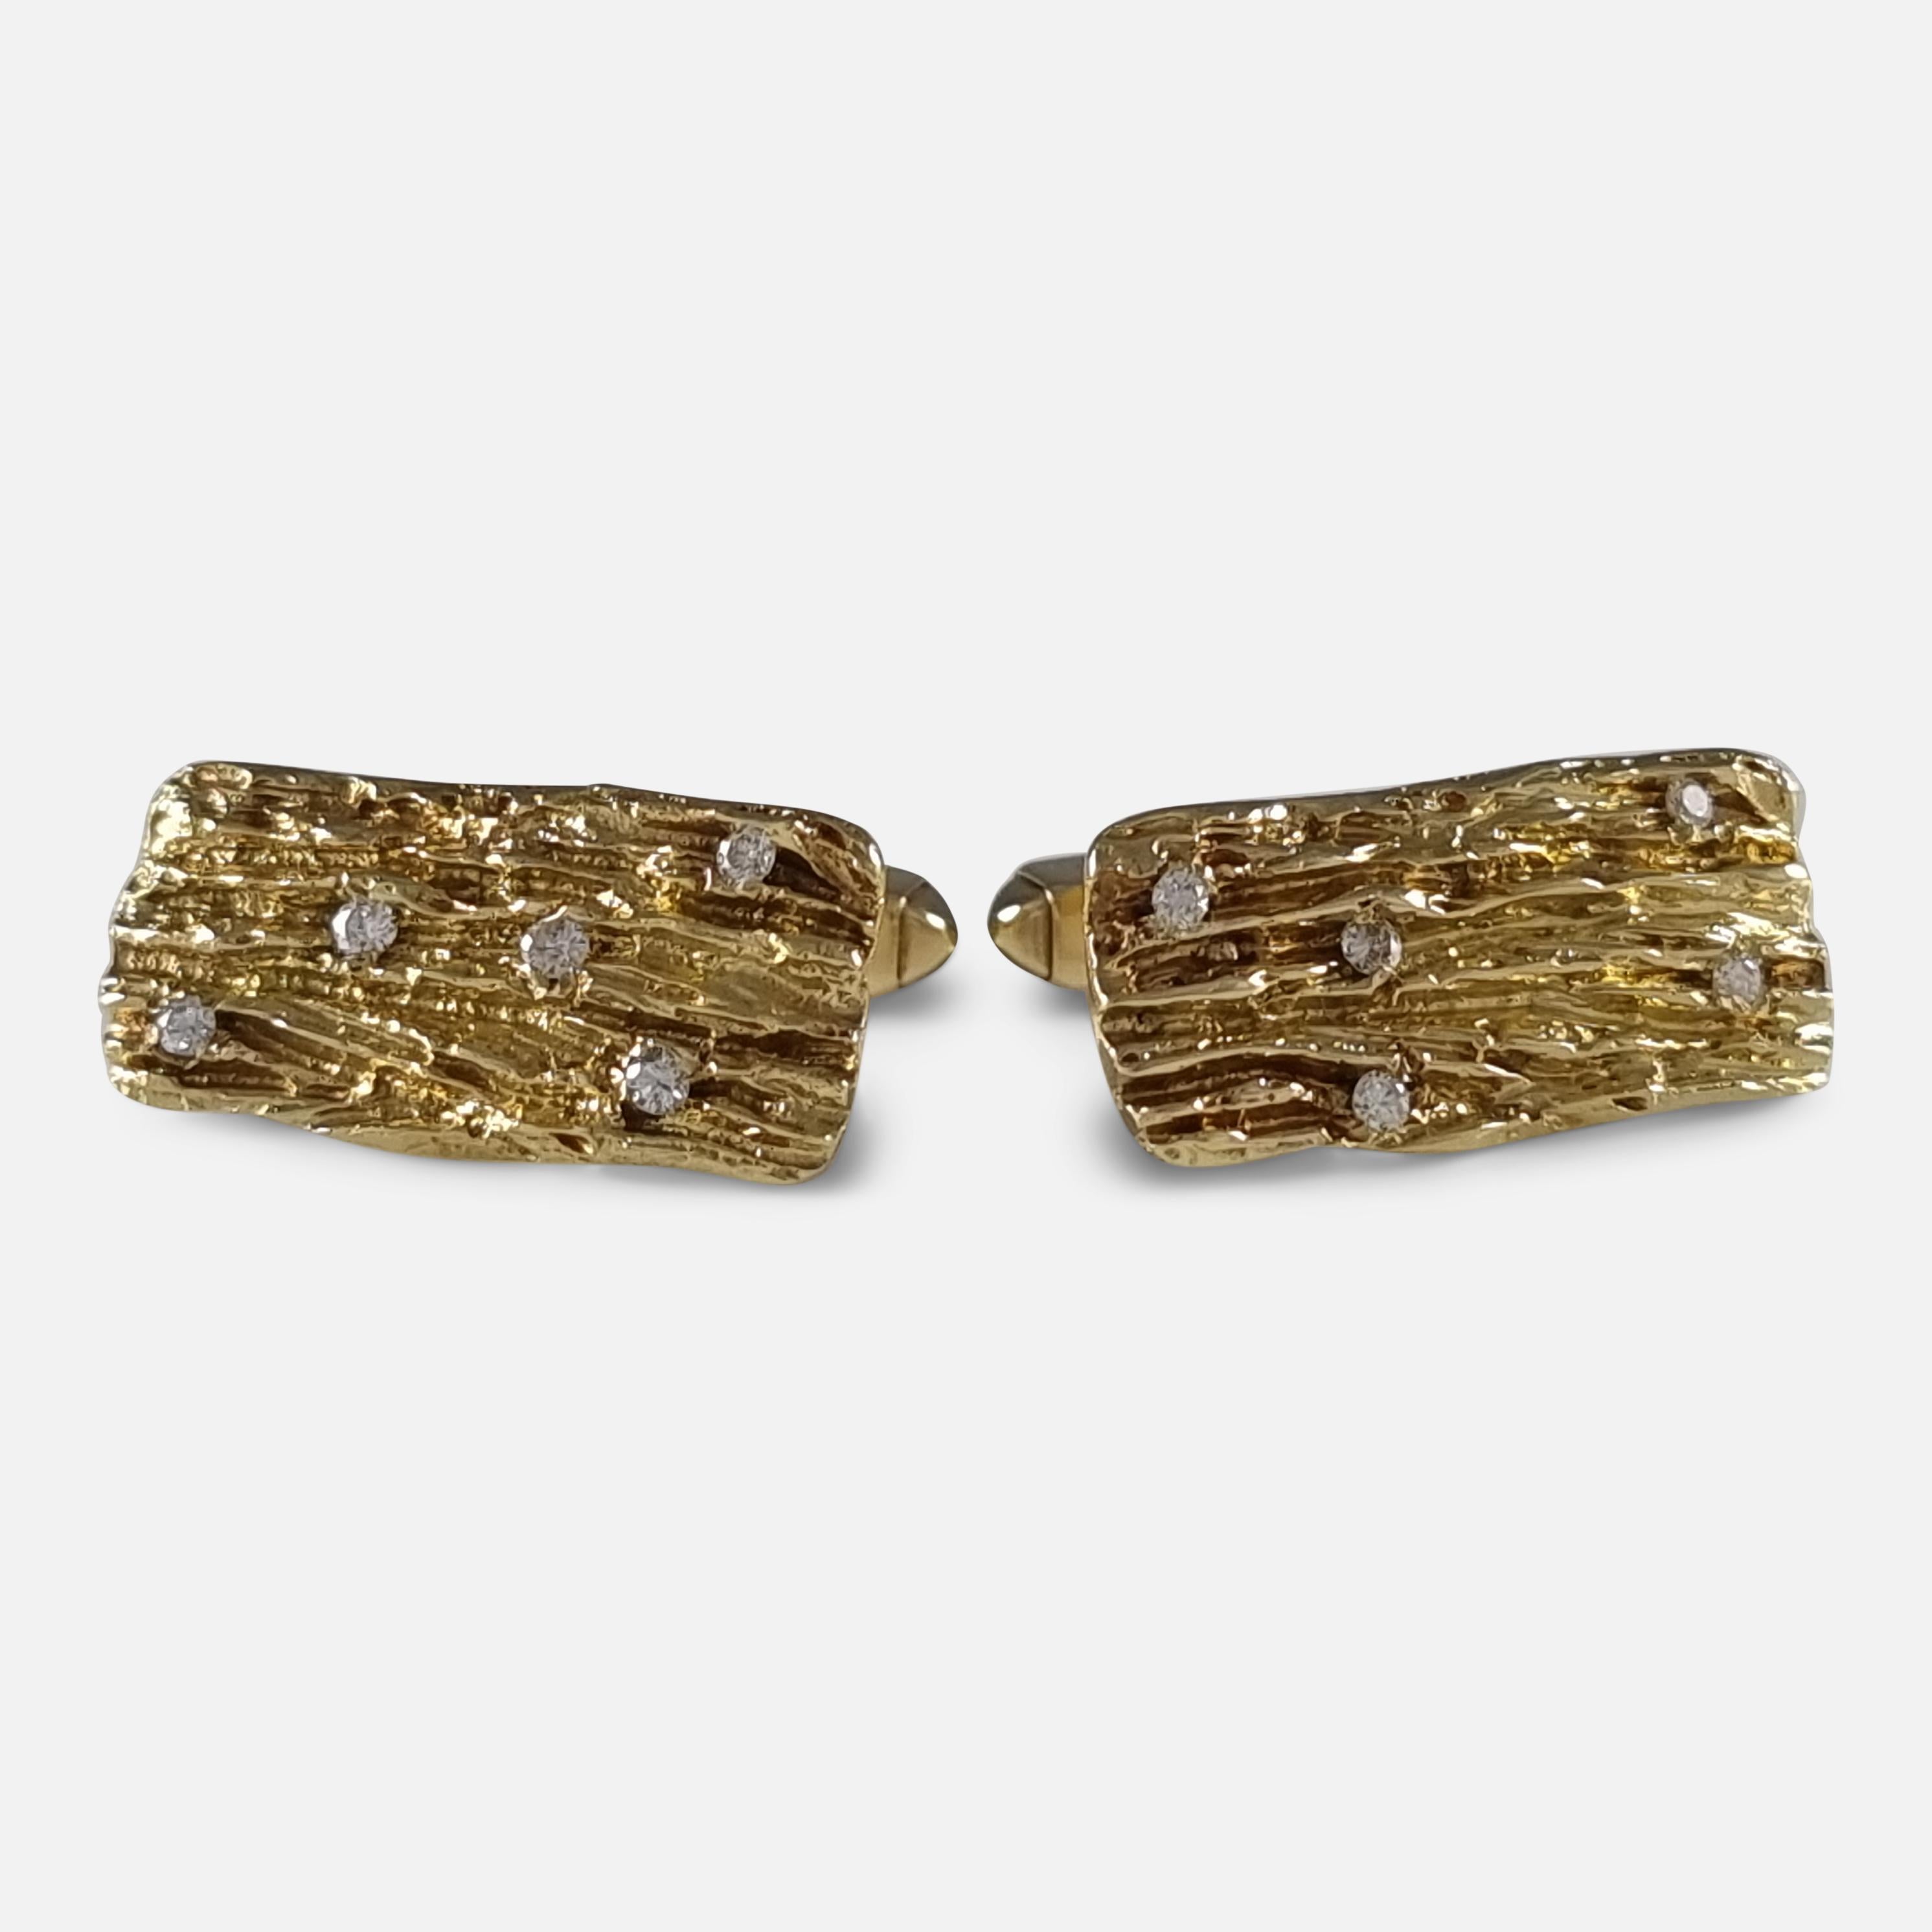 A pair of 18ct yellow gold cufflinks from 1968, featuring rectangular plaques with a textured bark finish and five eight-cut diamonds, attached to swivel T-bar terminals. 

Period: - Late 20th Century.

Date: - London, 1968.

Maker: - Maker’s mark